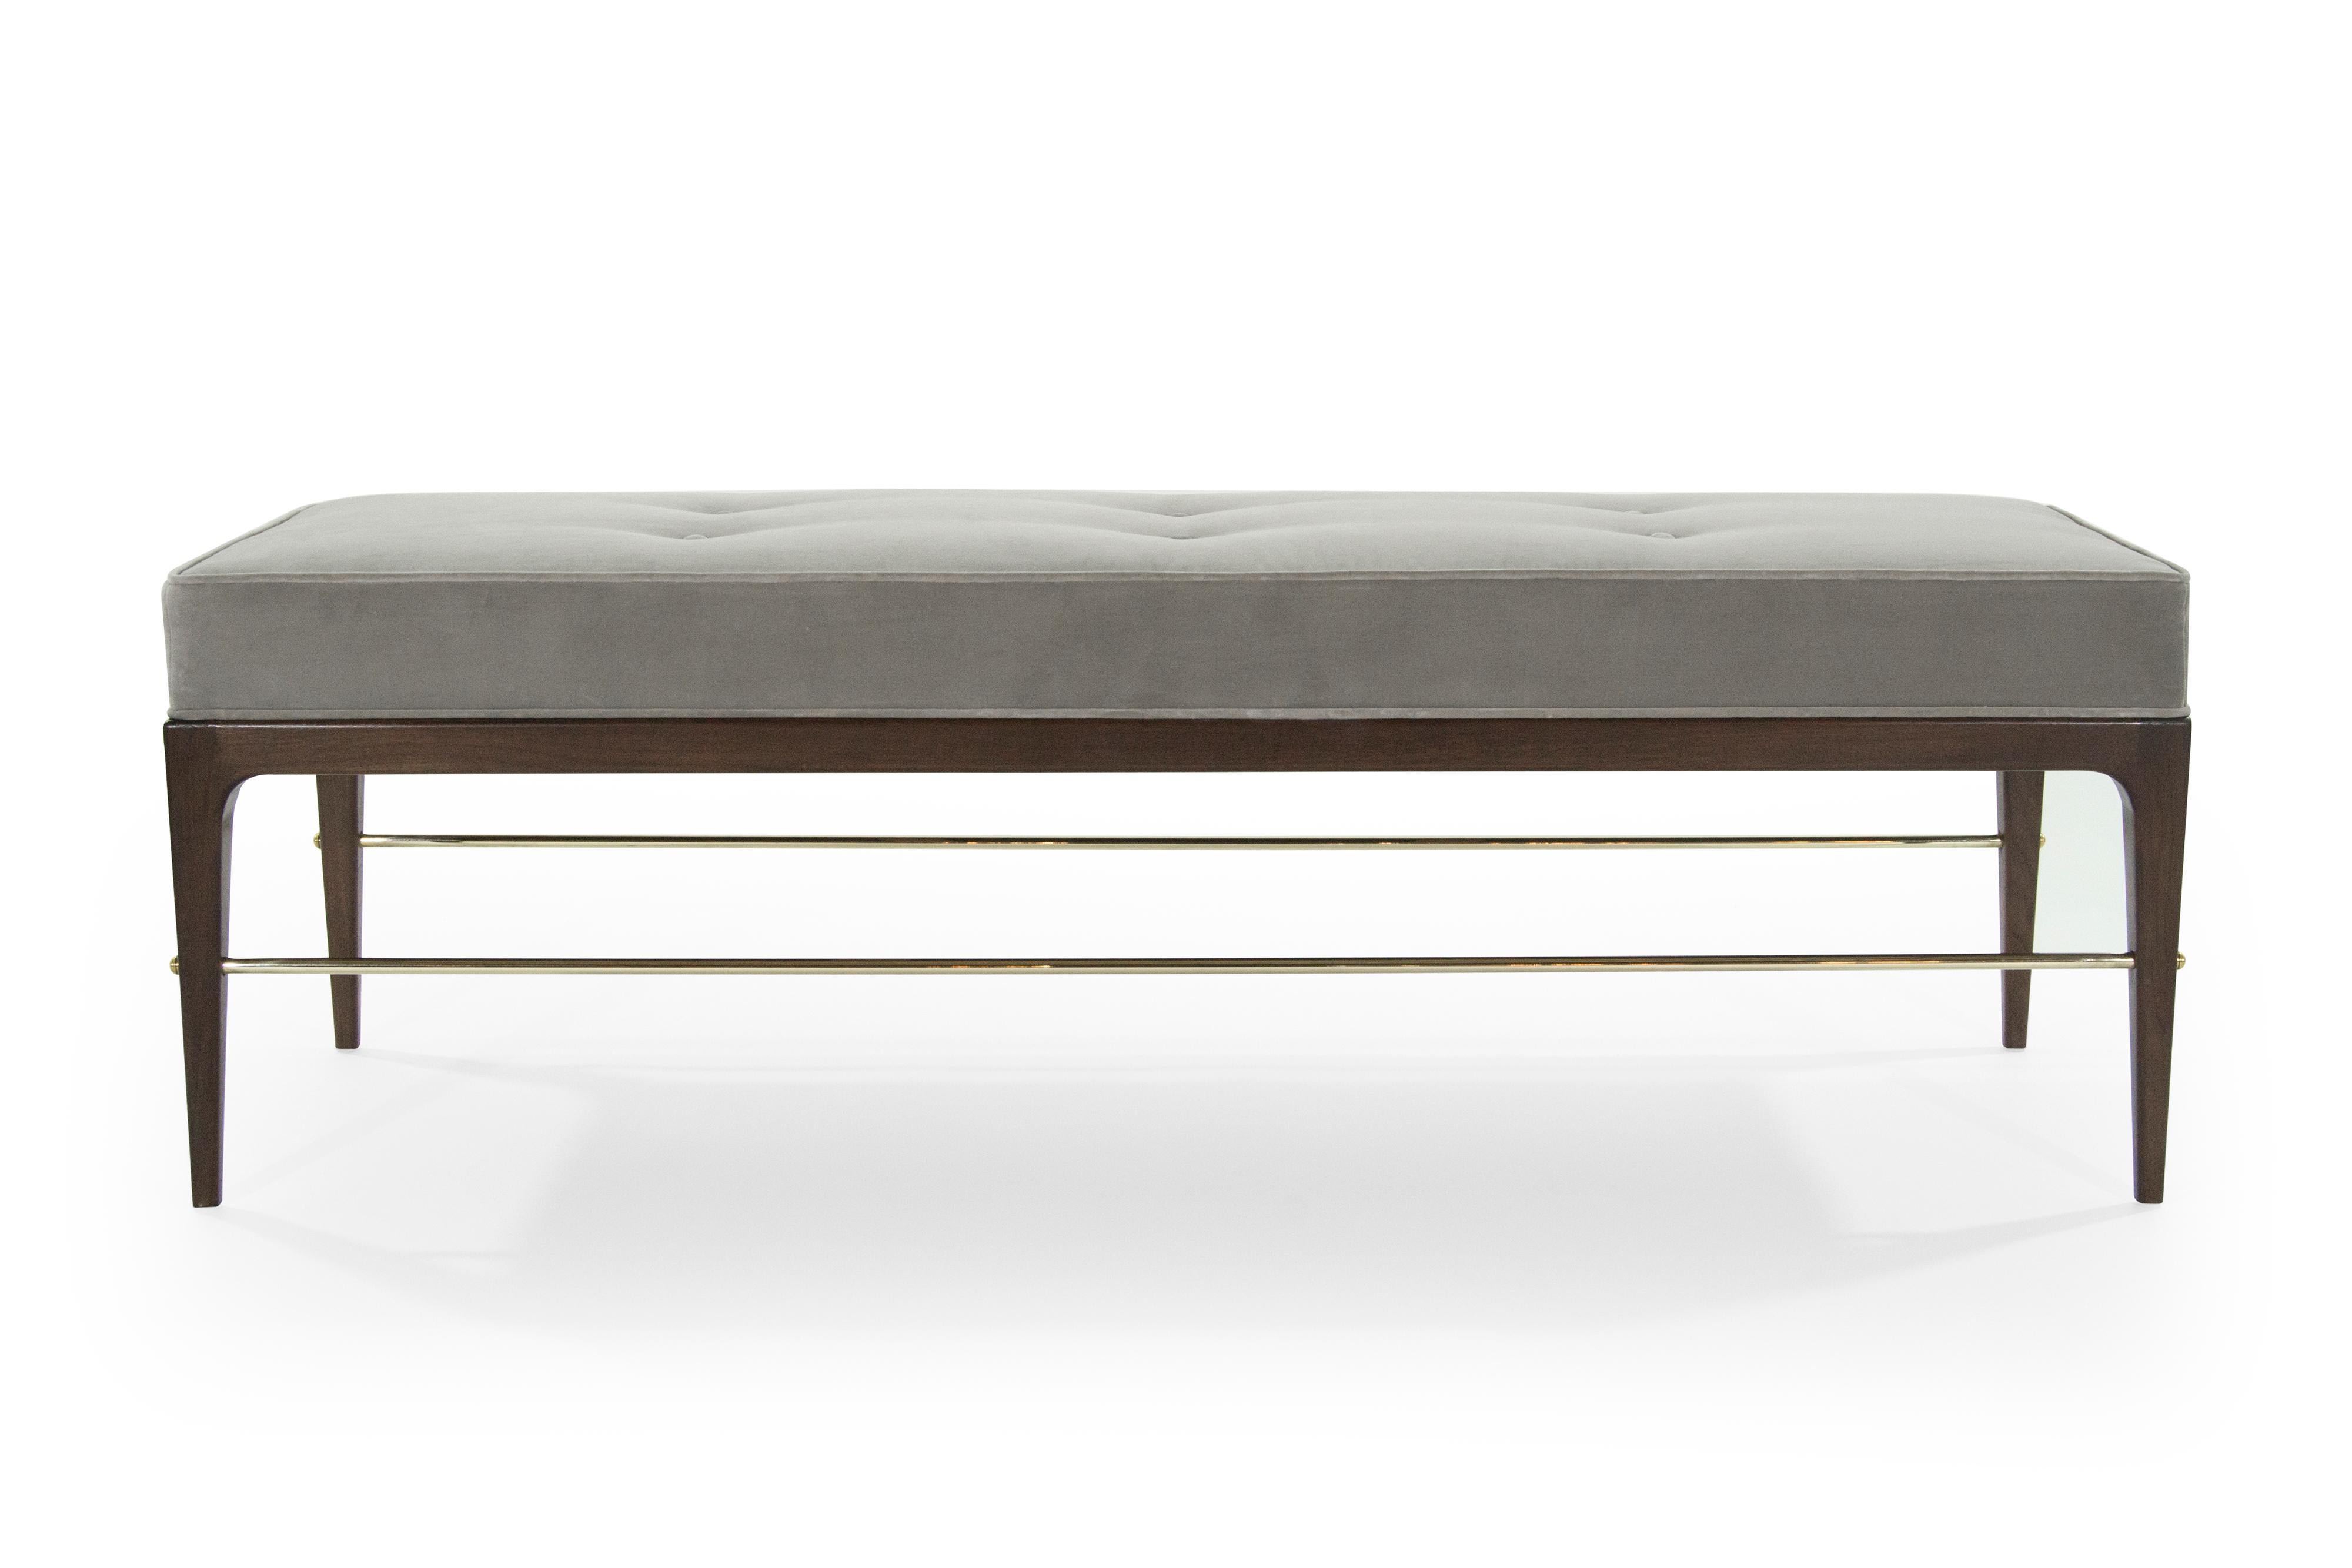 Inspired by iconic furniture designer Edward Wormley. Our Linear bench boasts Mid-Century Modern minimalistic design, clean lines with tons of character. Handcrafted solid walnut. 
Available in custom sizes, finishes, COM/COL. Metal finishes